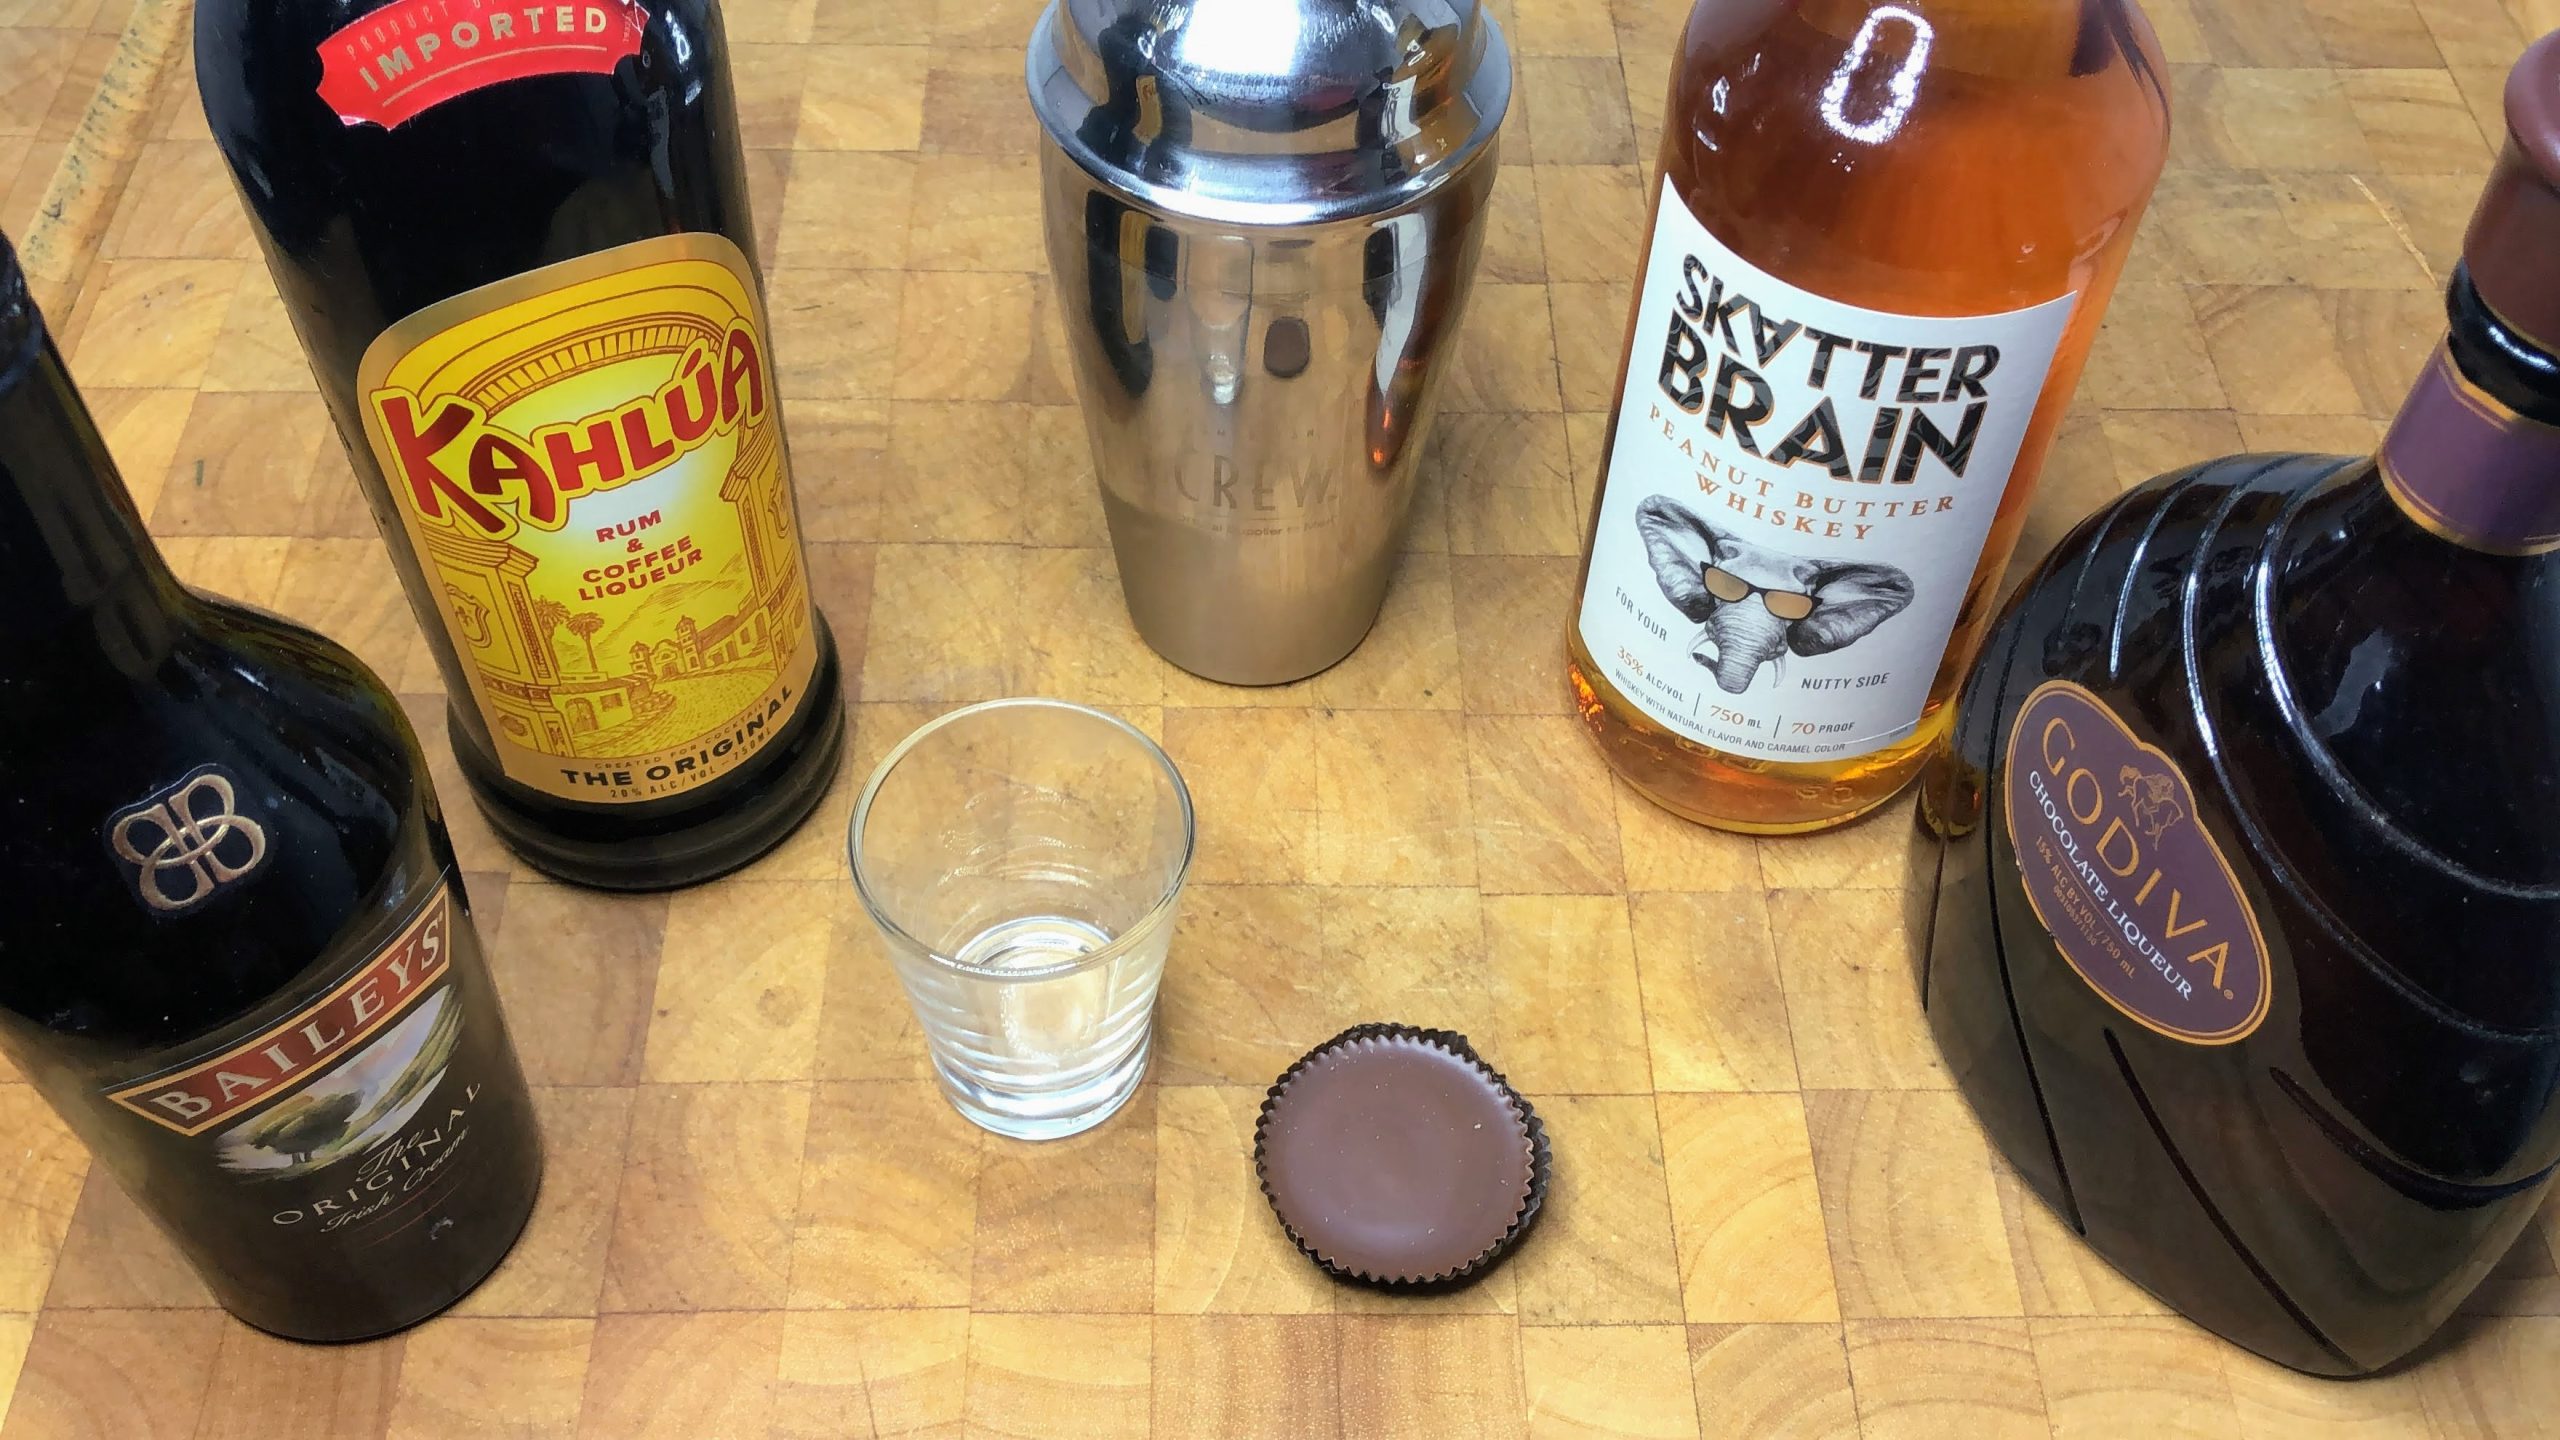 empty shot glass next to shaker, peanut butter cup and bottles of godiva, peanut butter whiskey, kahlua and irish cream